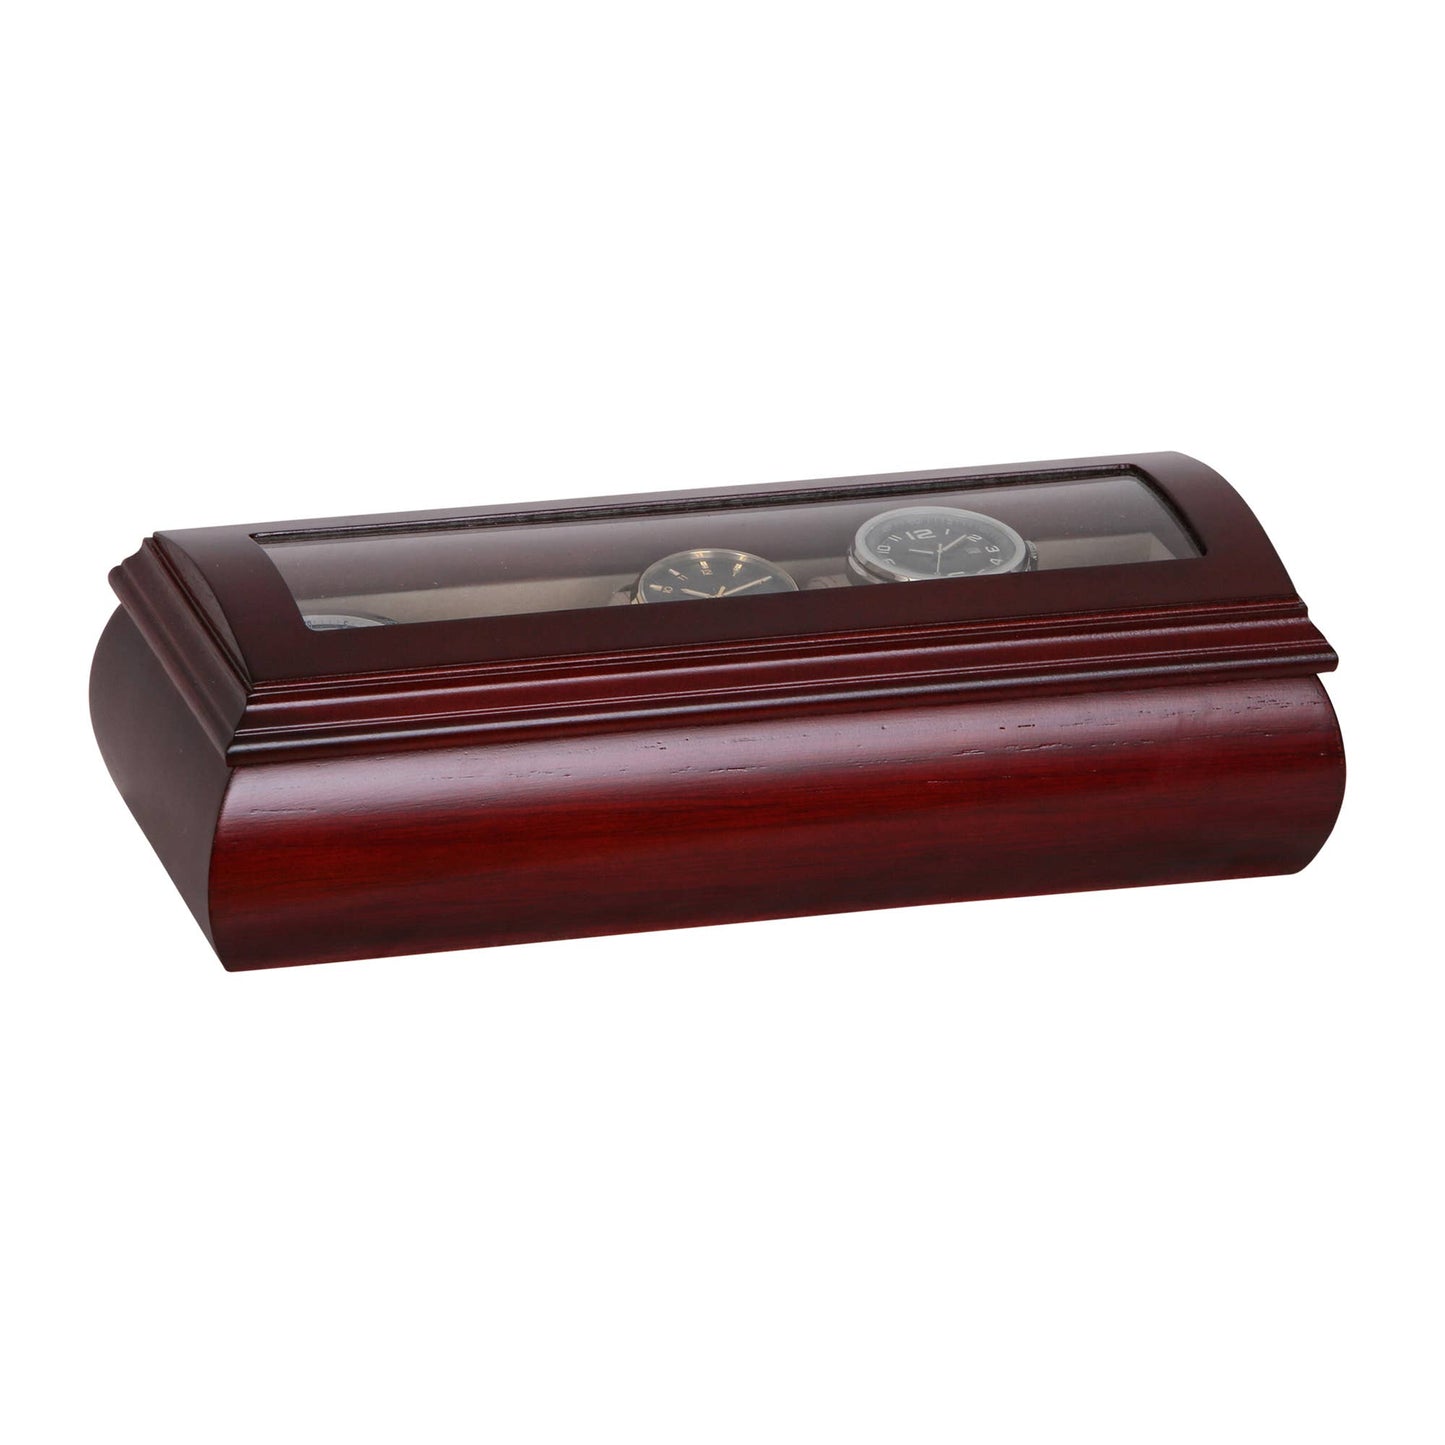 Mele & Co. "Emery" Domed Glass Lid & Cherry Finish Watch Box